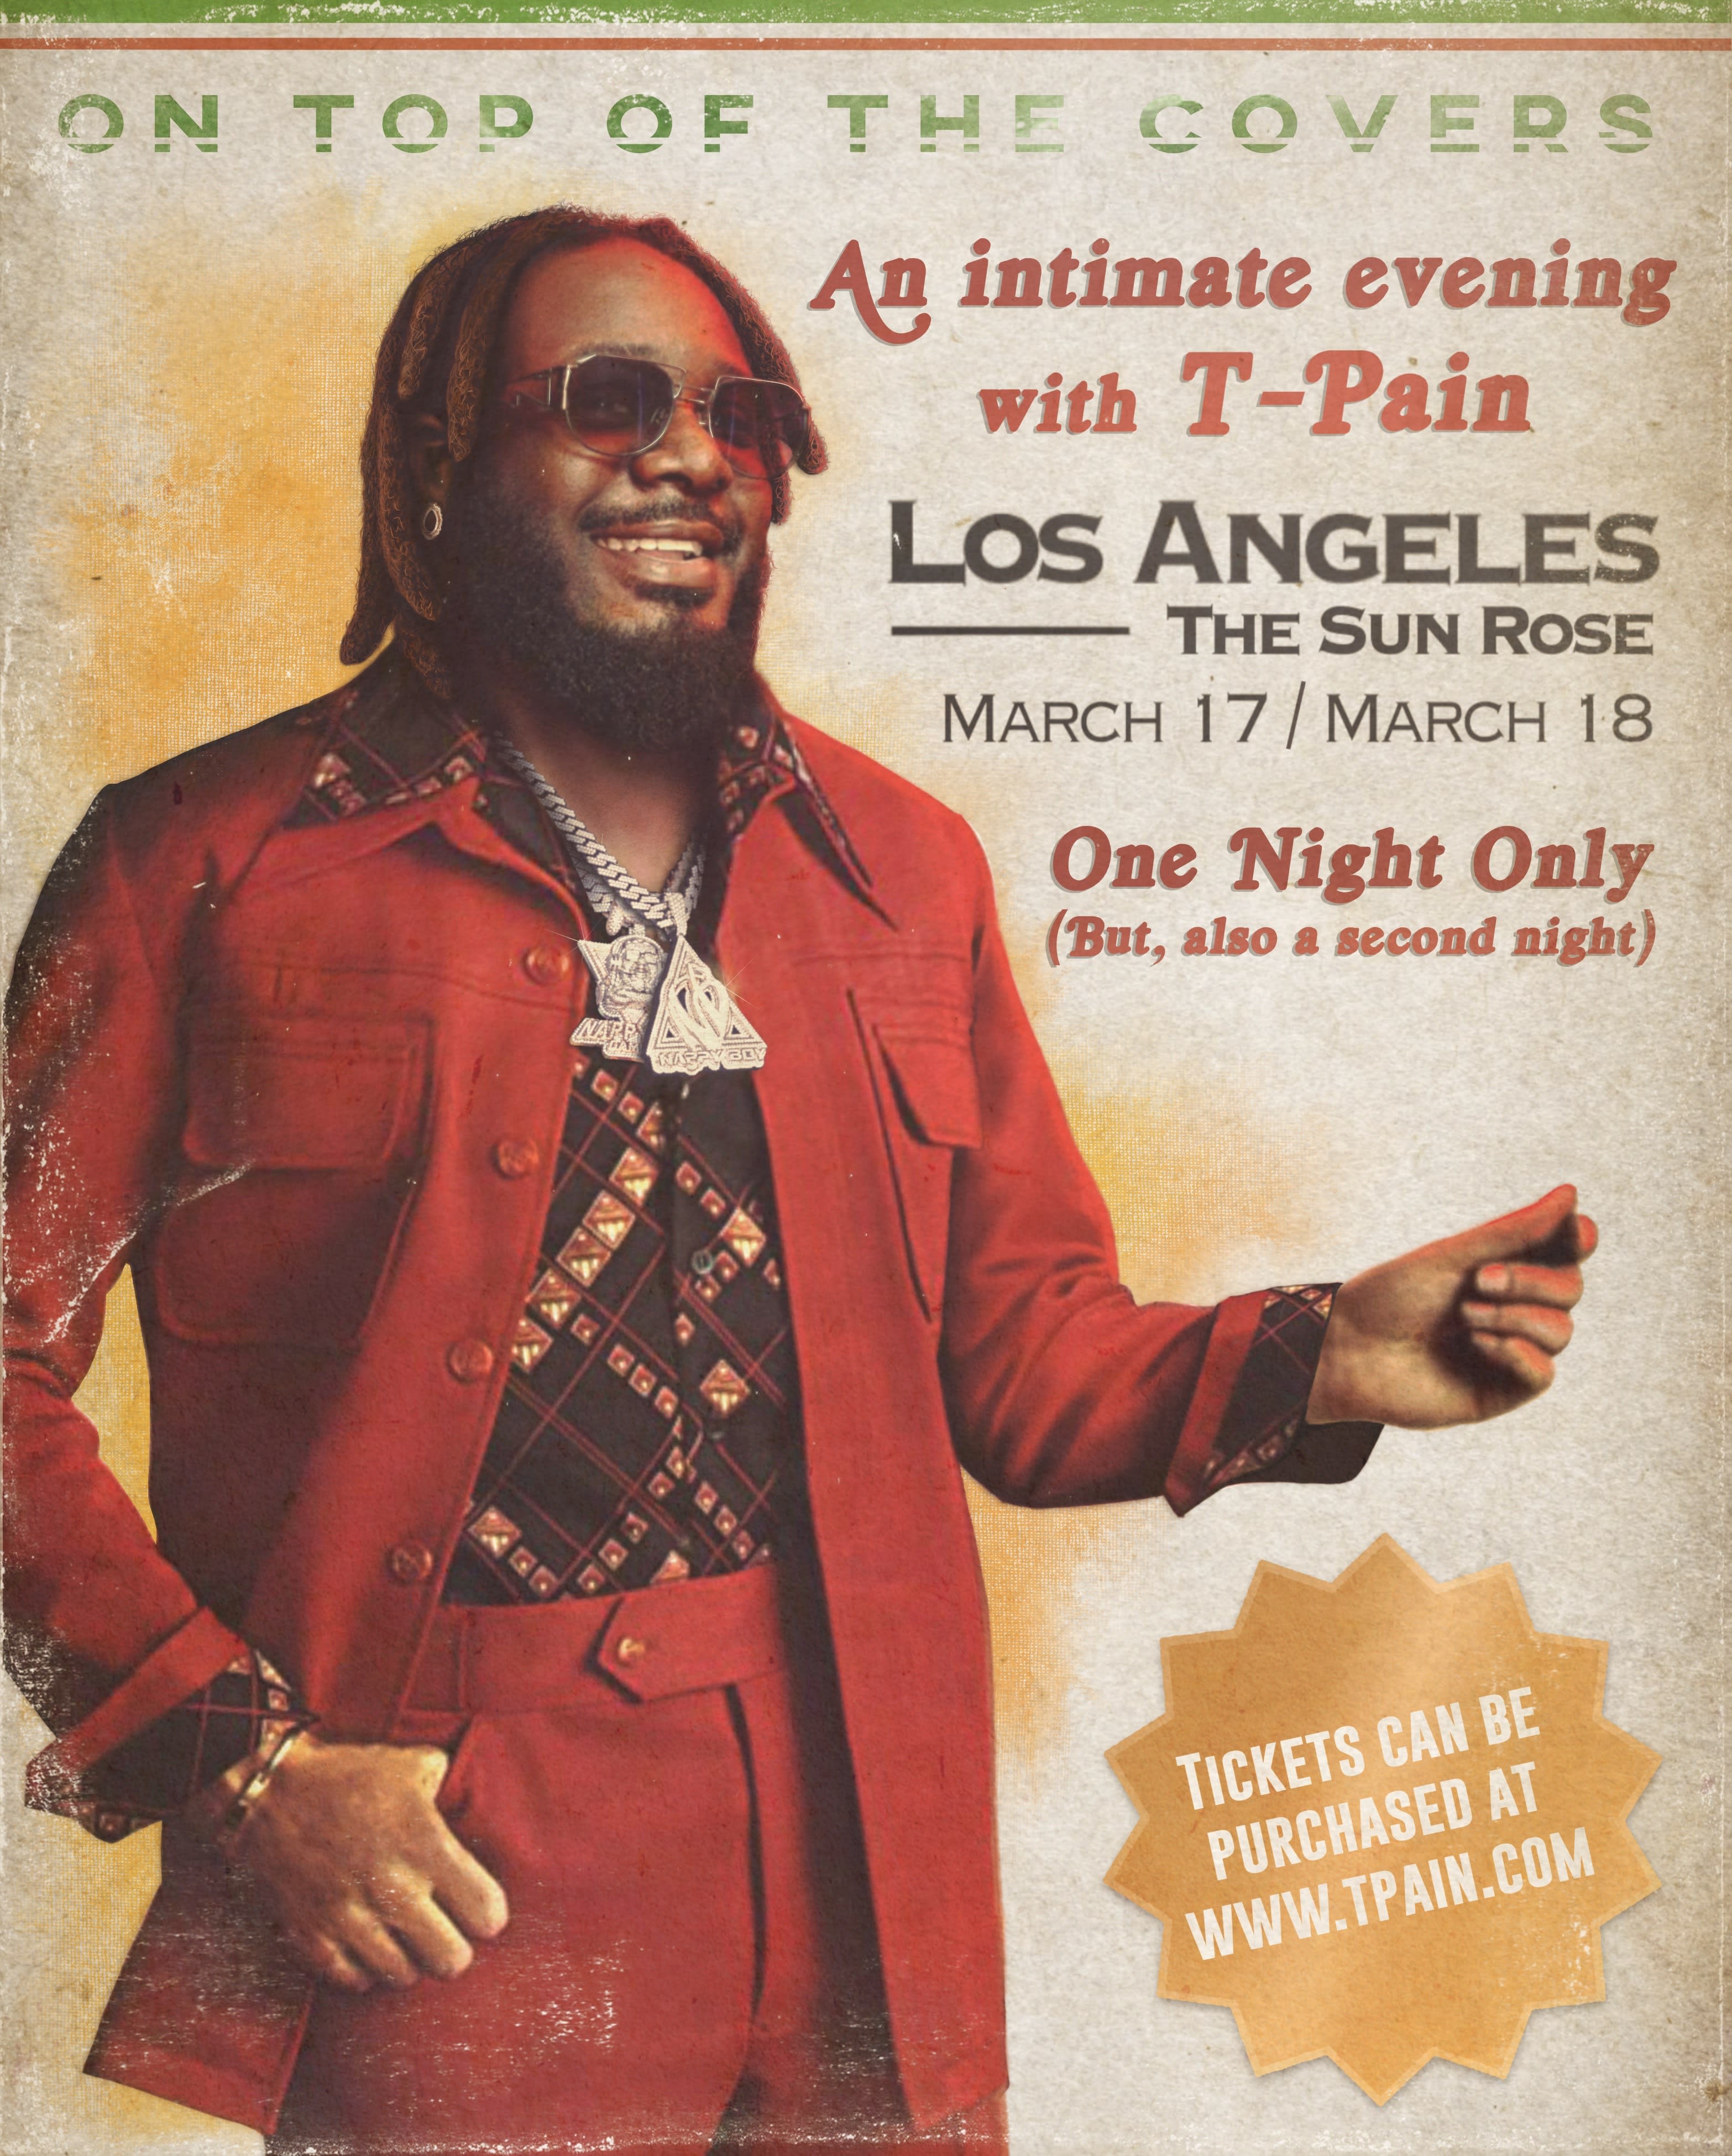 T Pain show flyer is pictured